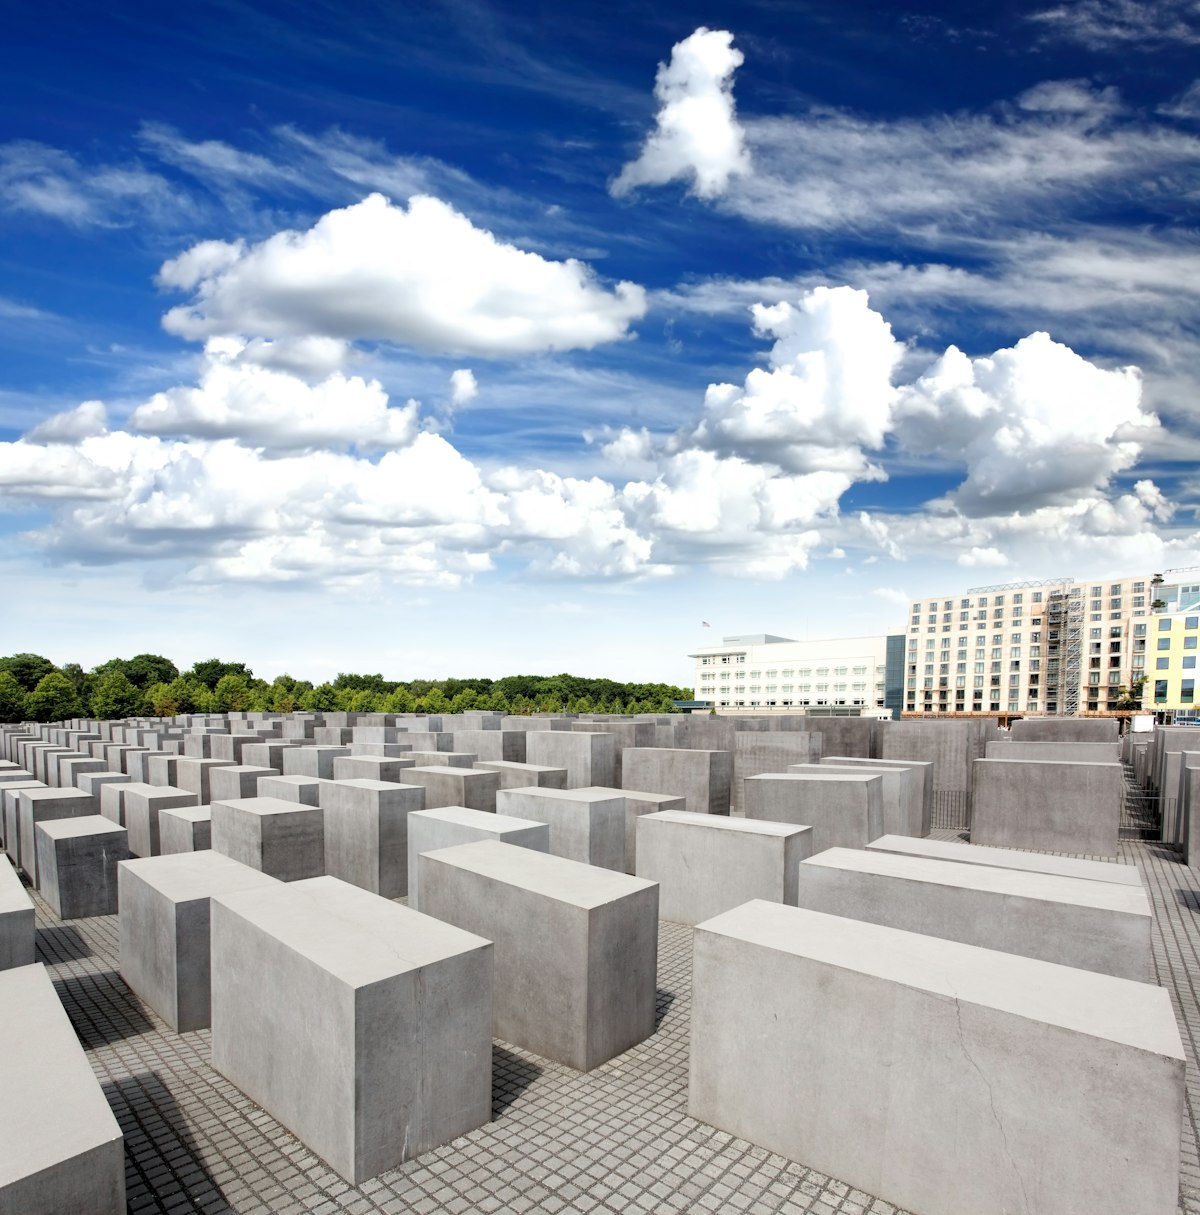 The jewish memorial in central berlin, germany; Shutterstock ID 59438677; Your name (First / Last): Josh Vogel; Project no. or GL code: 56530; Network activity no. or Cost Centre: Online-Design; Product or Project: 65050/7529/Josh Vogel/LP.com Destination Galleries